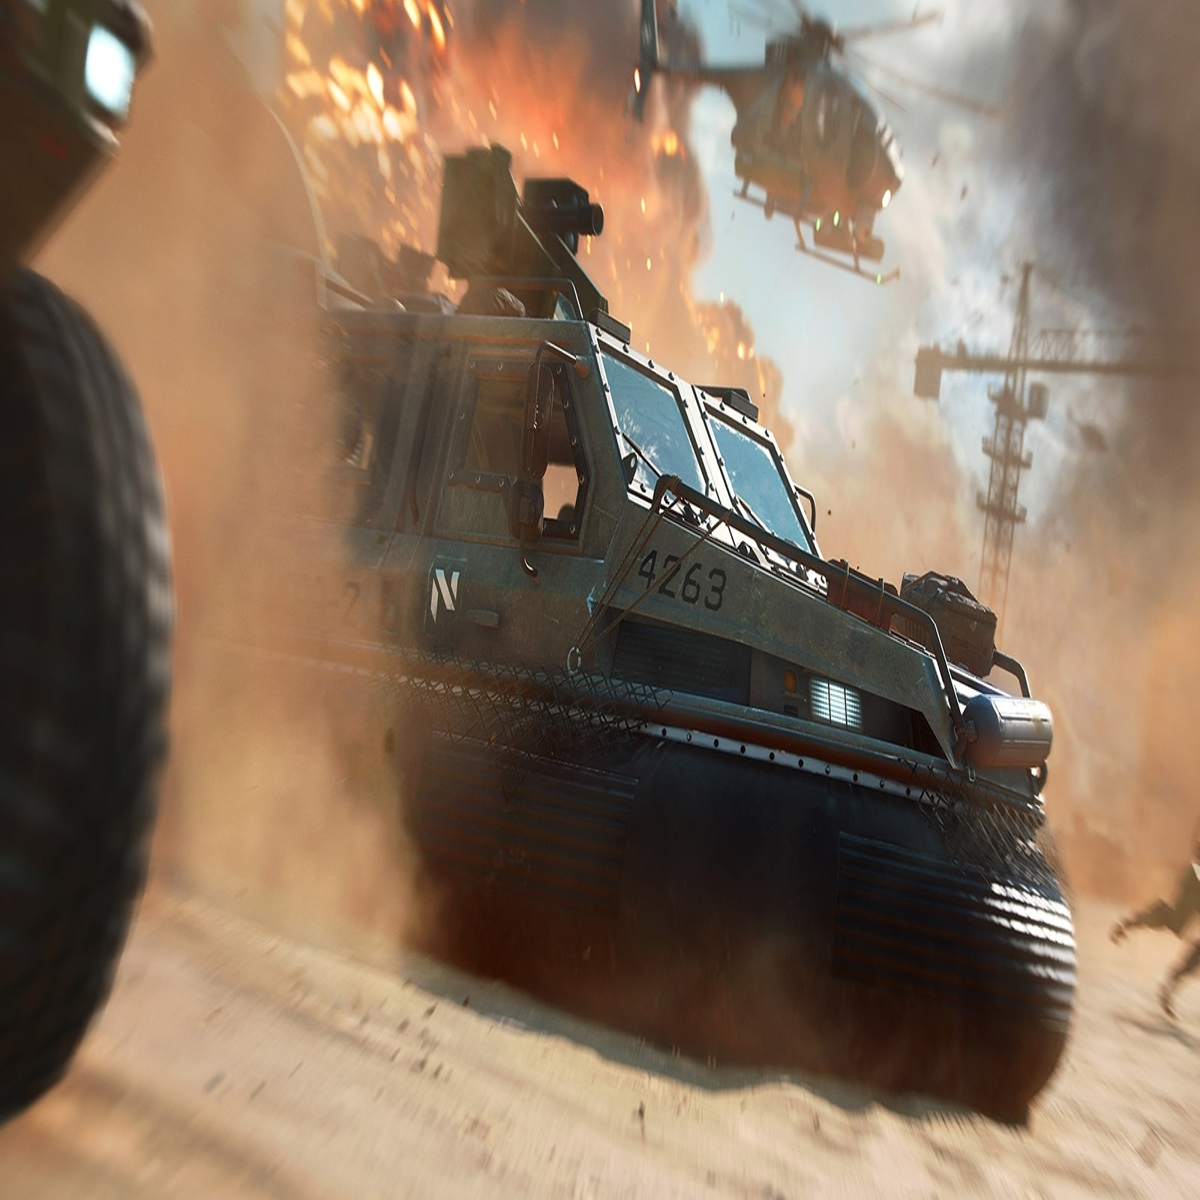 Battlefield 2042 will have cross-play, at least within console